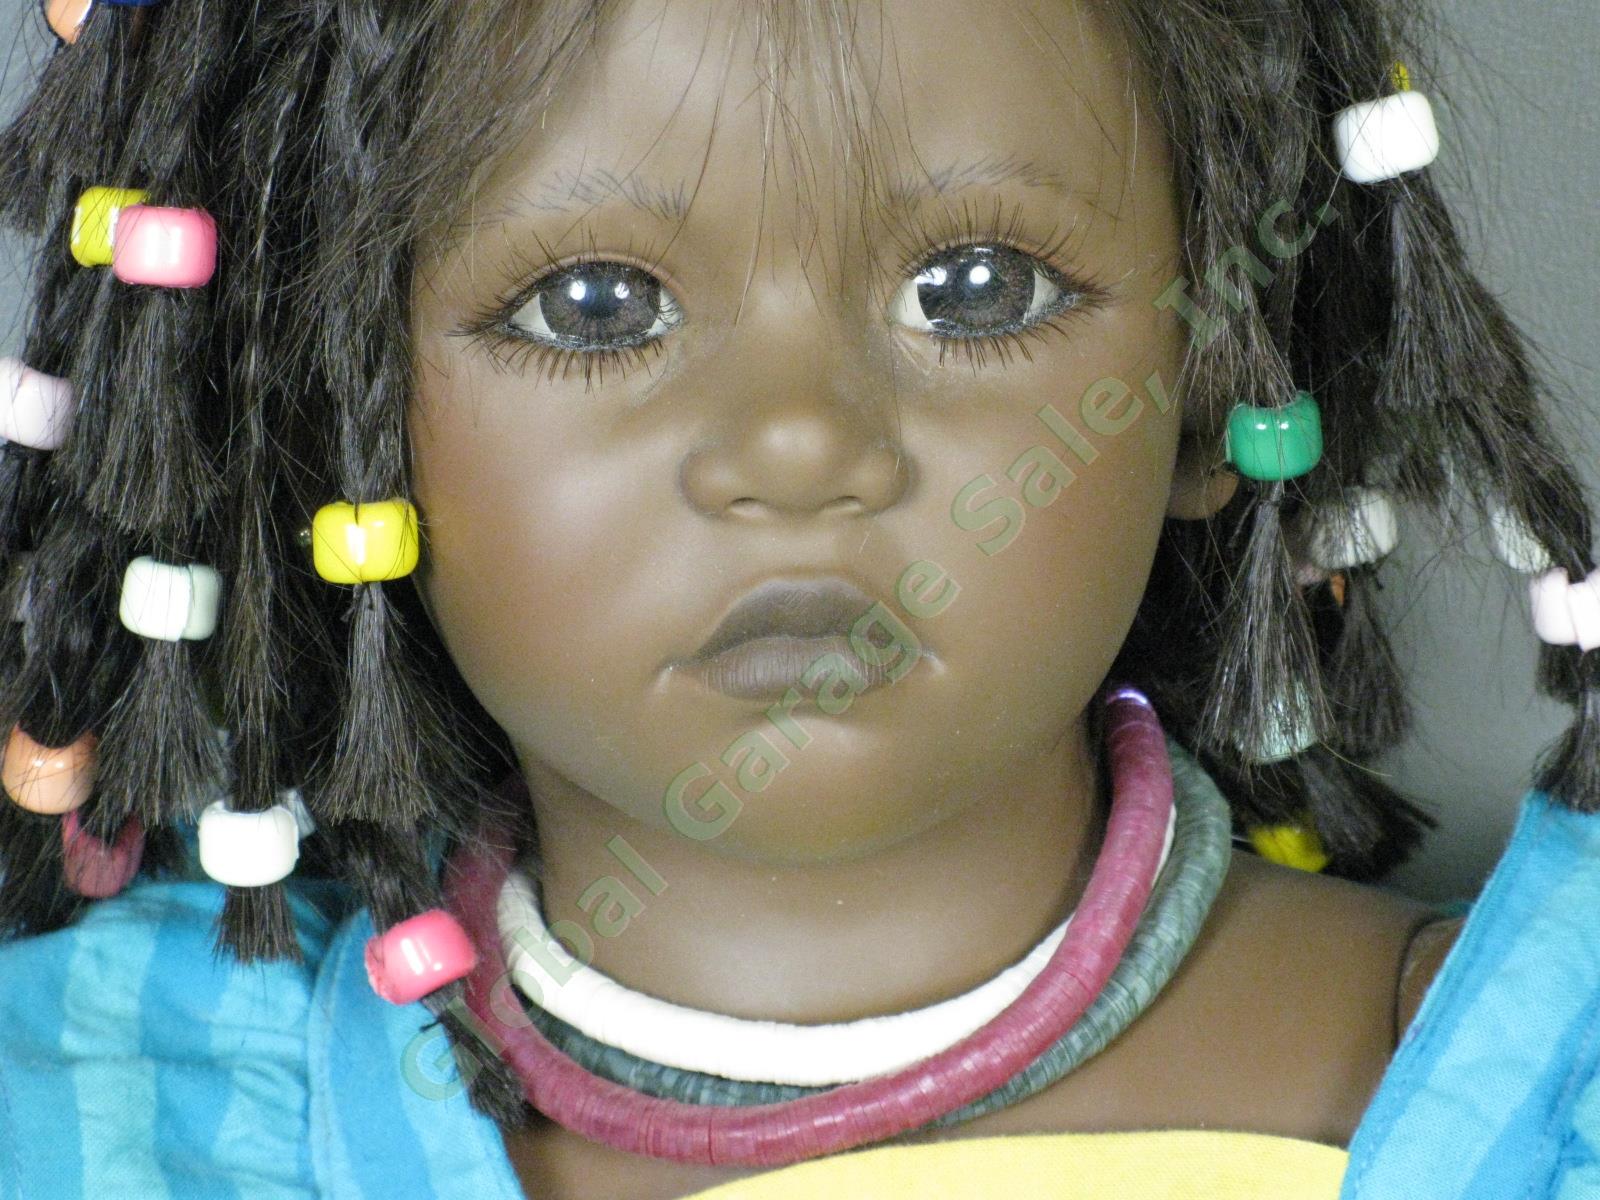 Annette Himstedt 26" Ayoka African Girl Doll 4848 Signed! Orig Box COA Exc Cond! 2